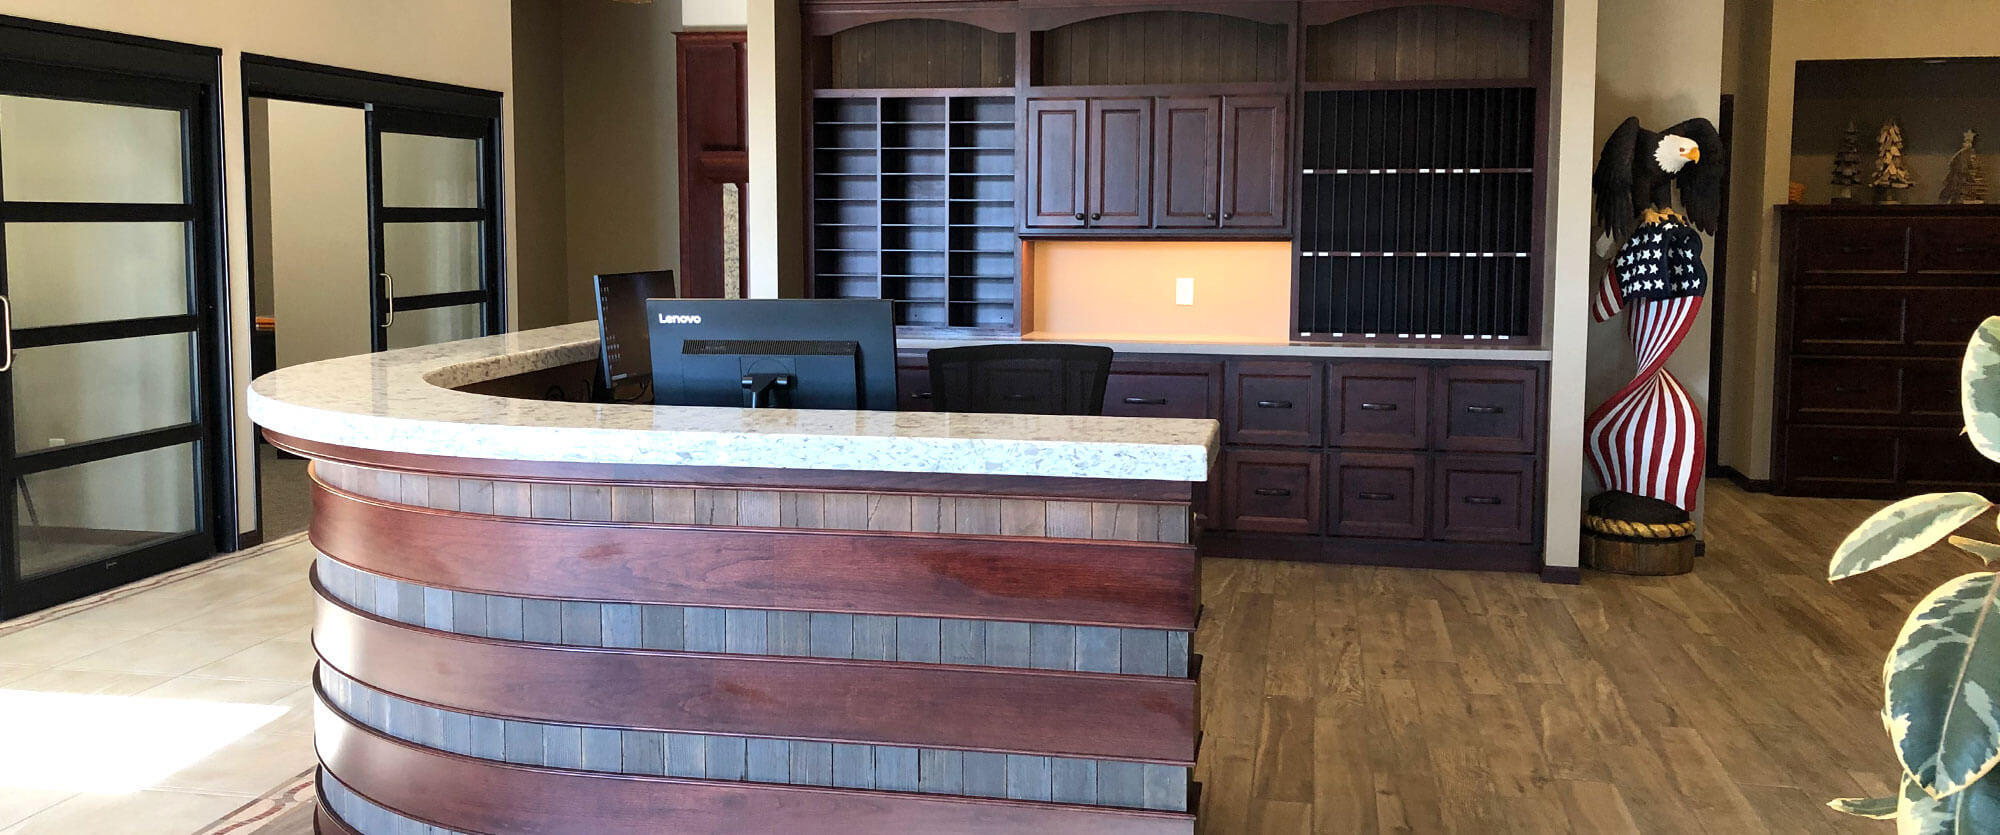 Custom wood receiption desk and storage cabinets designed, built, and installed by finewood Structures of Browerville, MN